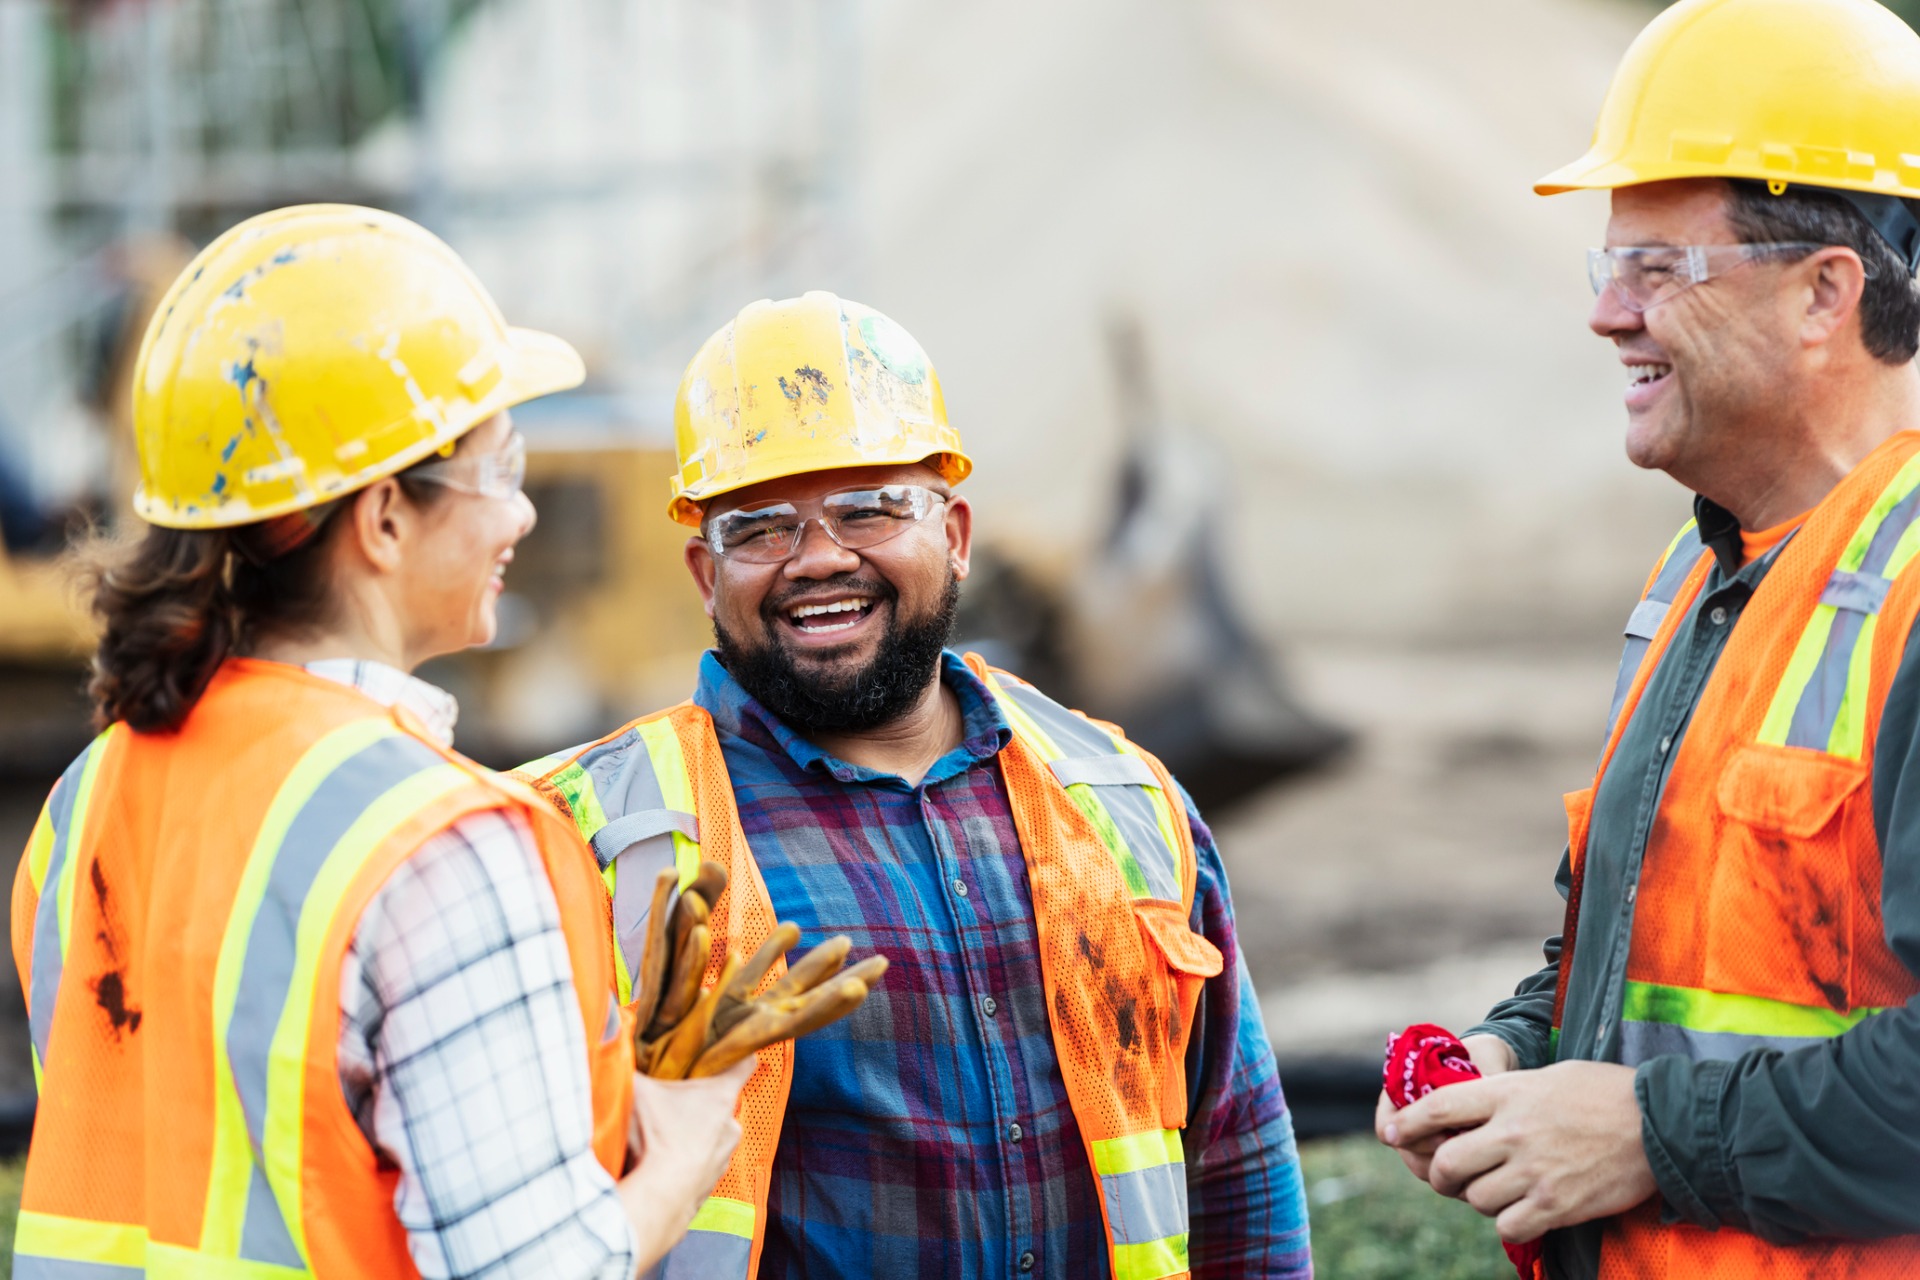 This is a photo of three construction workers having a conversation.